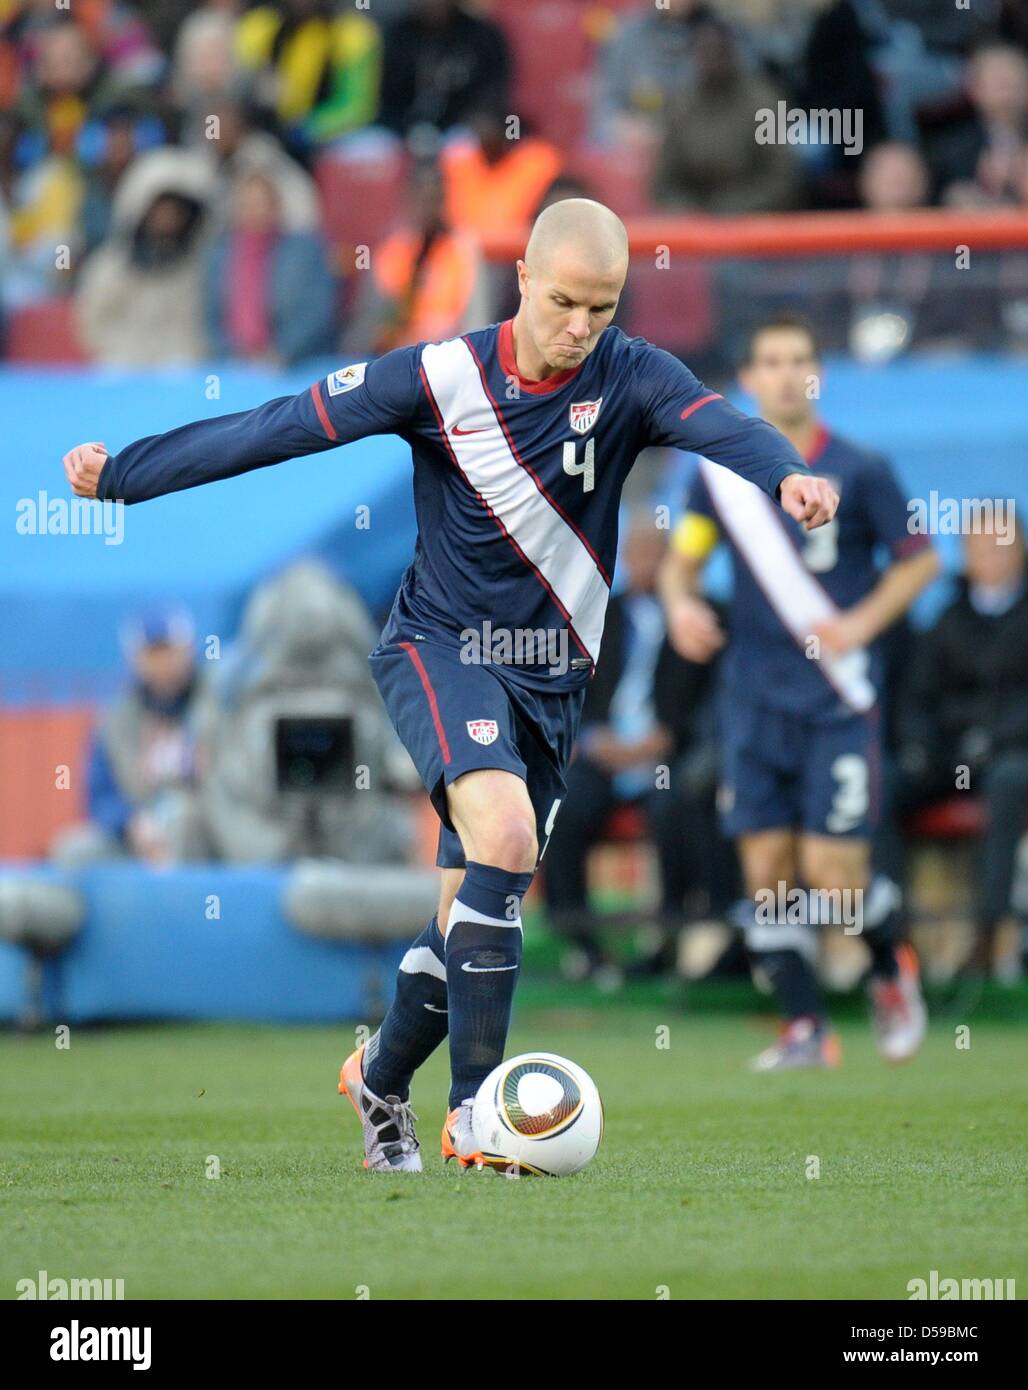 Michael Bradley of USA controls the ball during the FIFA World Cup 2010 group C match between Slovenia and USA at the Ellis Park Stadium in Johannesburg, South Africa 18 June 2010. Photo: Ronald Wittek dpa - Please refer to http://dpaq.de/FIFA-WM2010-TC Stock Photo